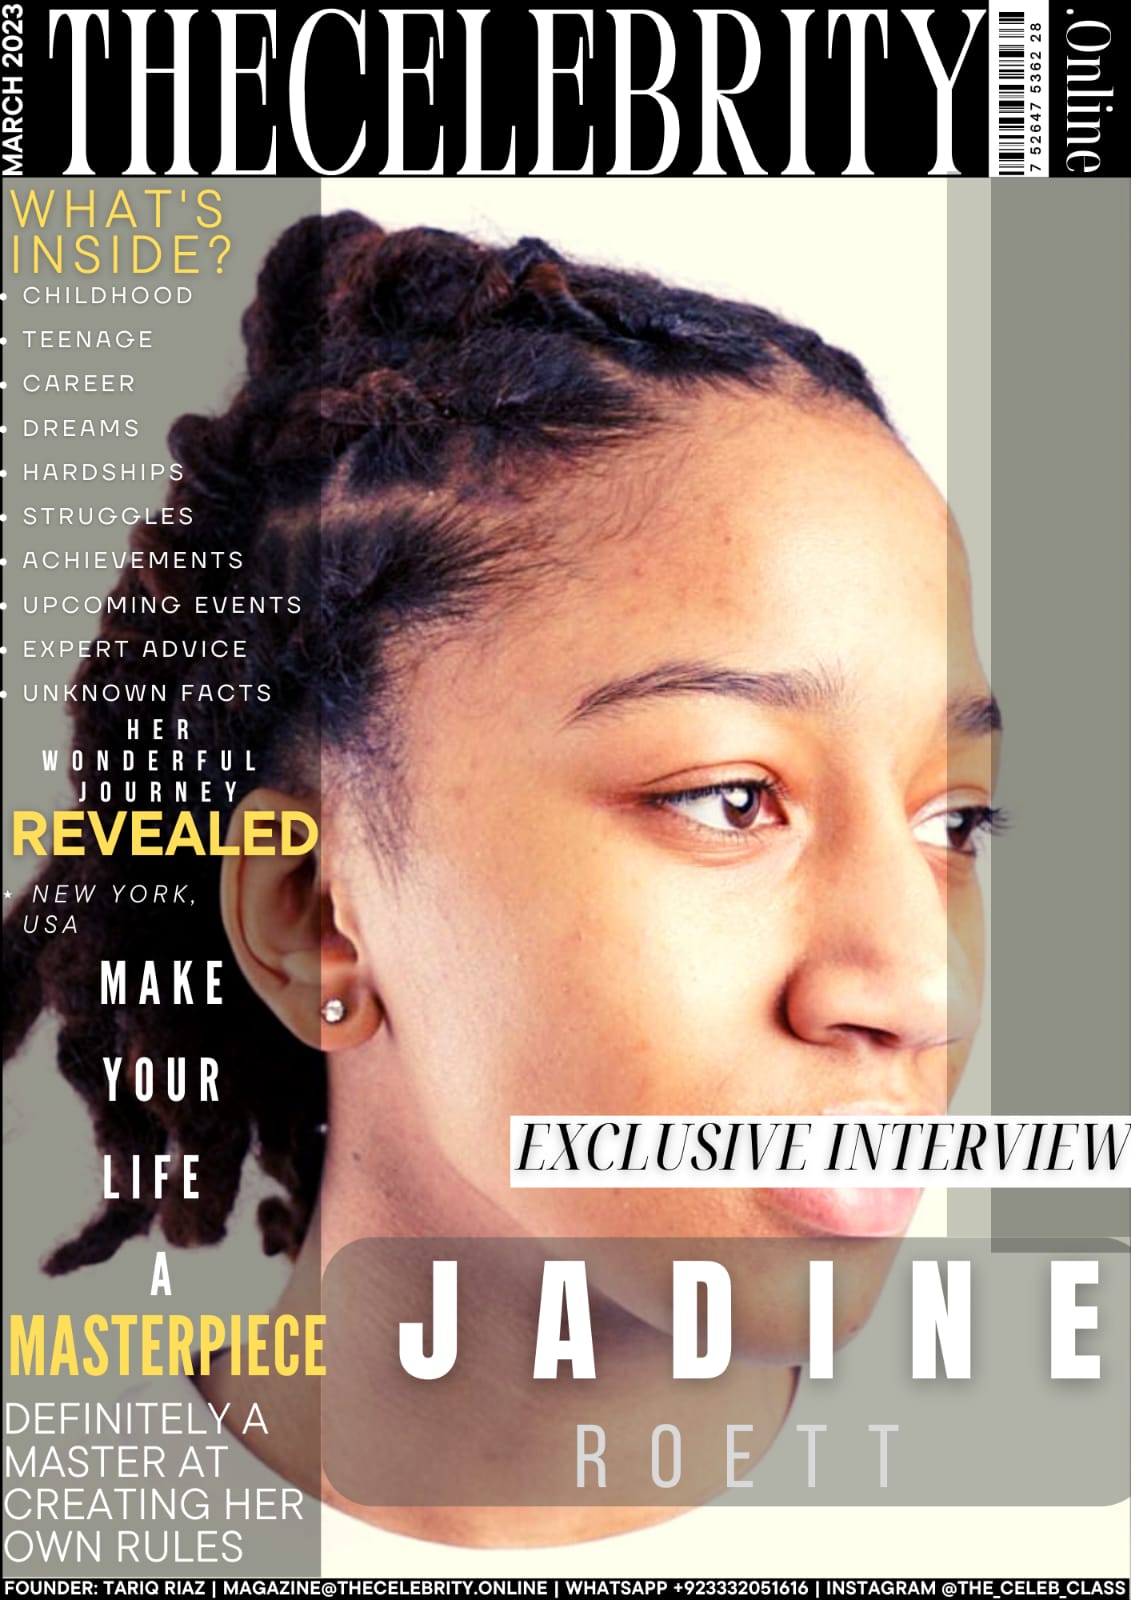 Jadine Roett Exclusive Interview – ‘Never View Your Passion As a Social Construct’